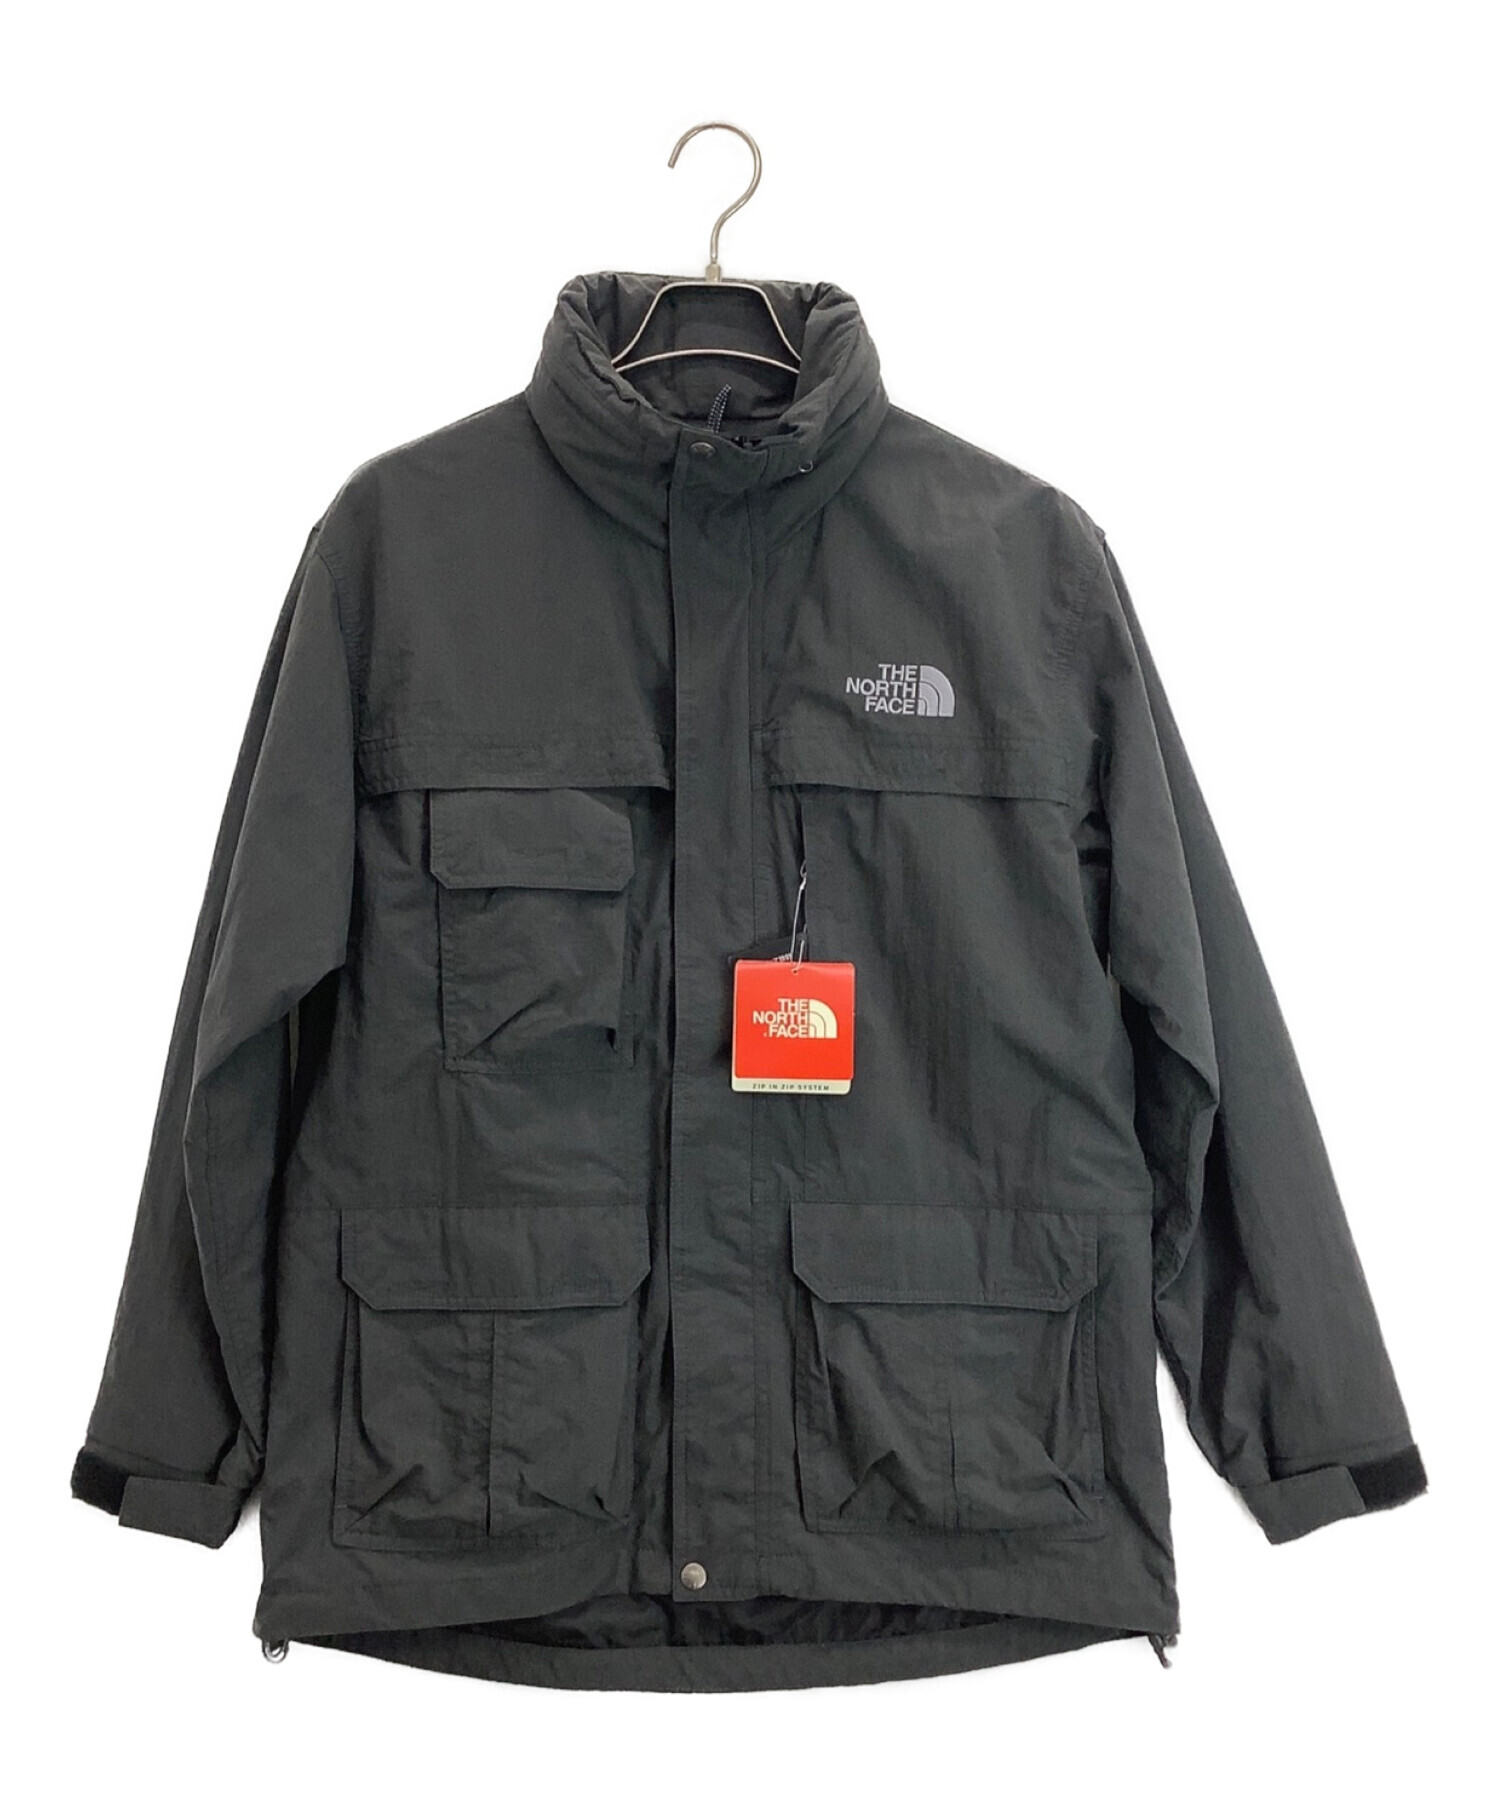 THE NORTH FACE NOVELTY FRONTIERS PARKA - マウンテンパーカー